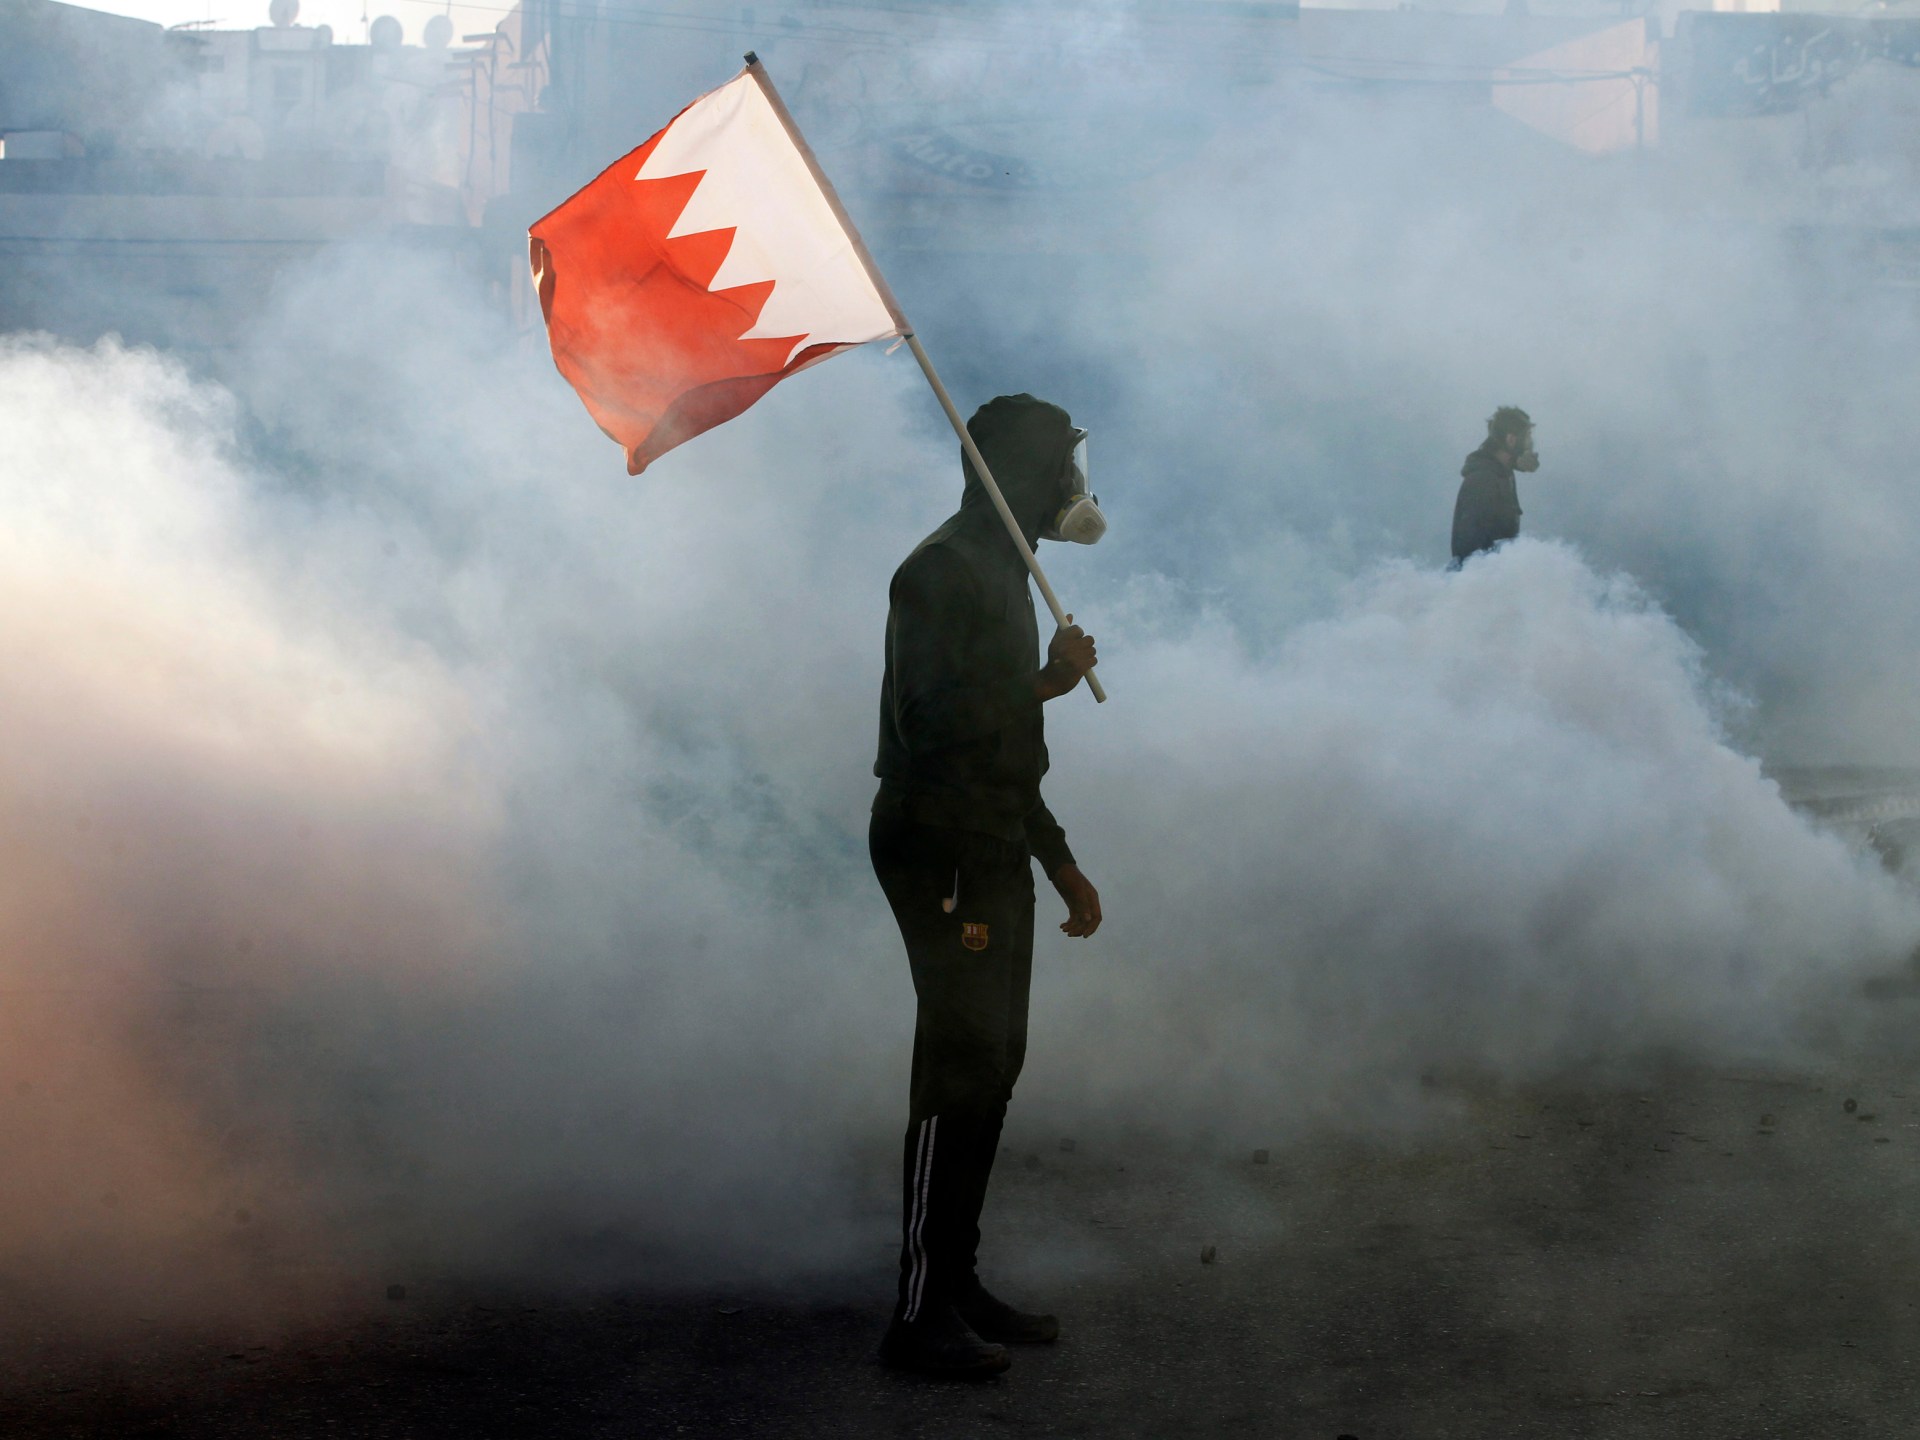 Rights group, UN experts express concern over Bahrain arrests | Human Rights News